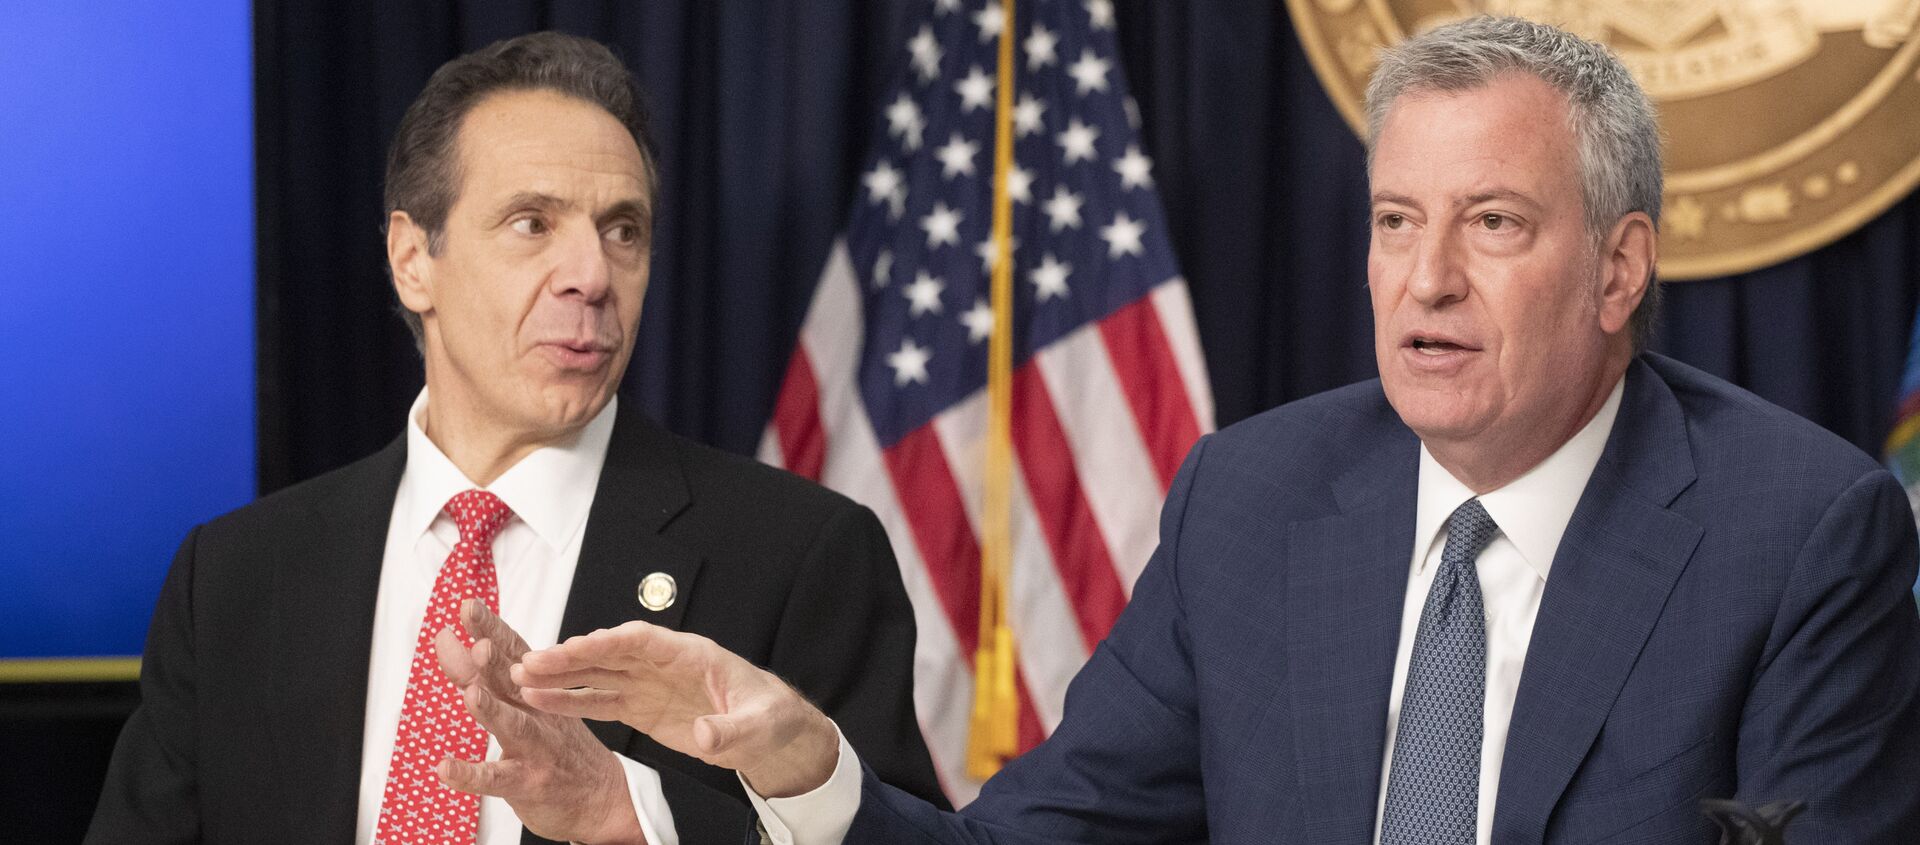 New York Gov. Andrew Cuomo, left, and Mayor Bill de Blasio discuss the state and city's preparedness for the spread of coronavirus at a news conference, Monday, March 2, 2020 in New York. - Sputnik International, 1920, 14.03.2021